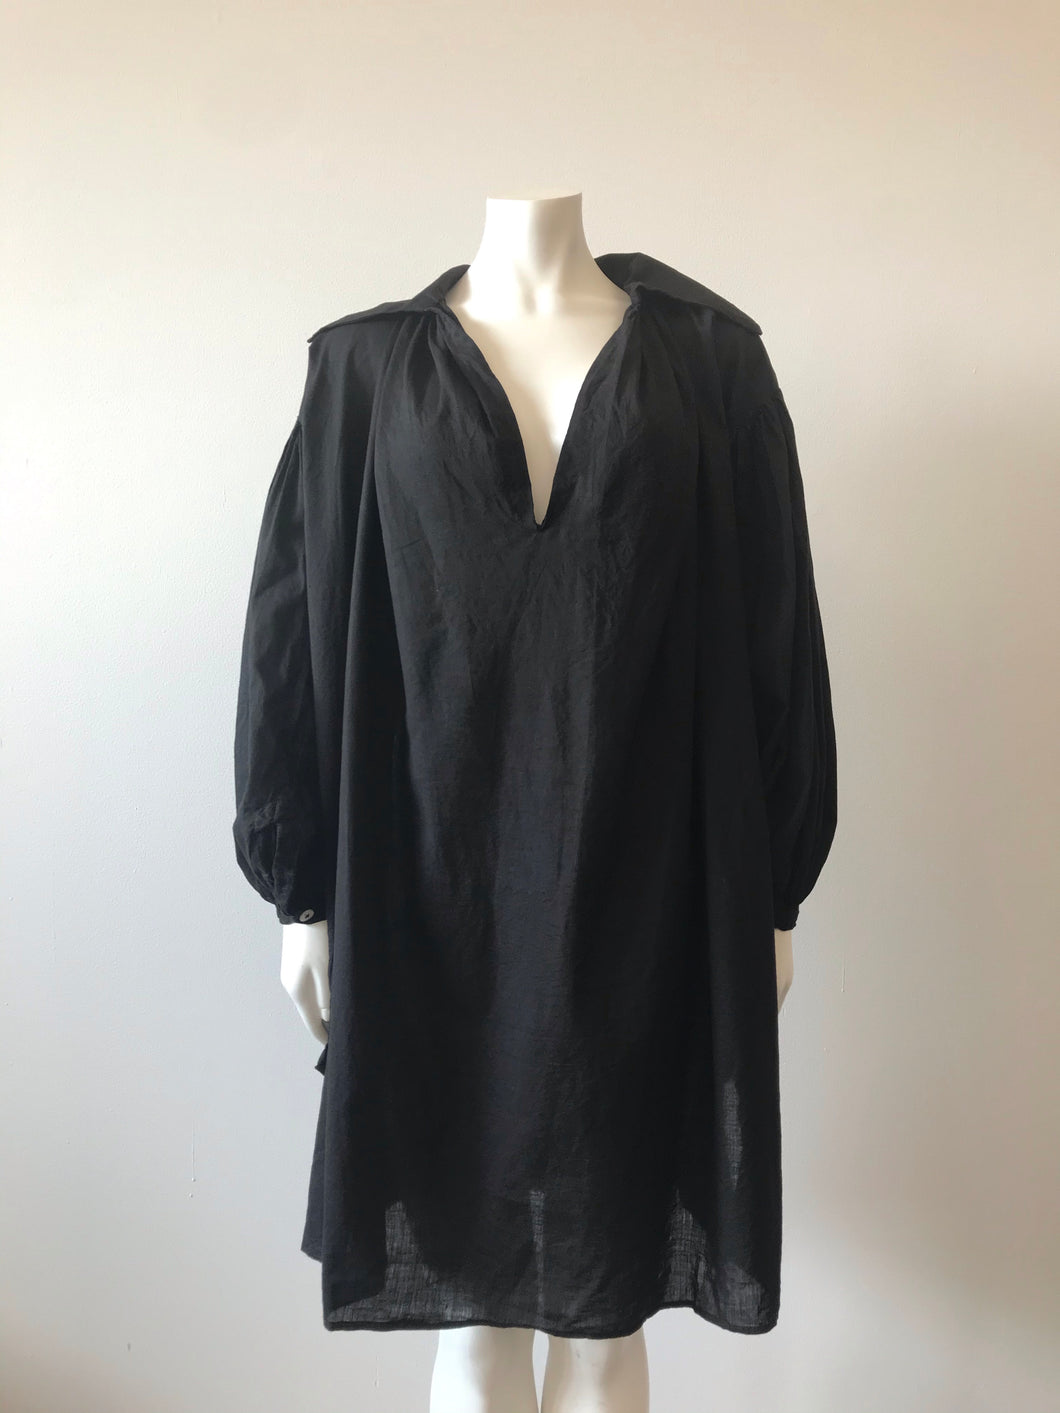 1981 Black Pirate Tunic Smock Top by World's End Vivienne Westwood & Malcom McLaren